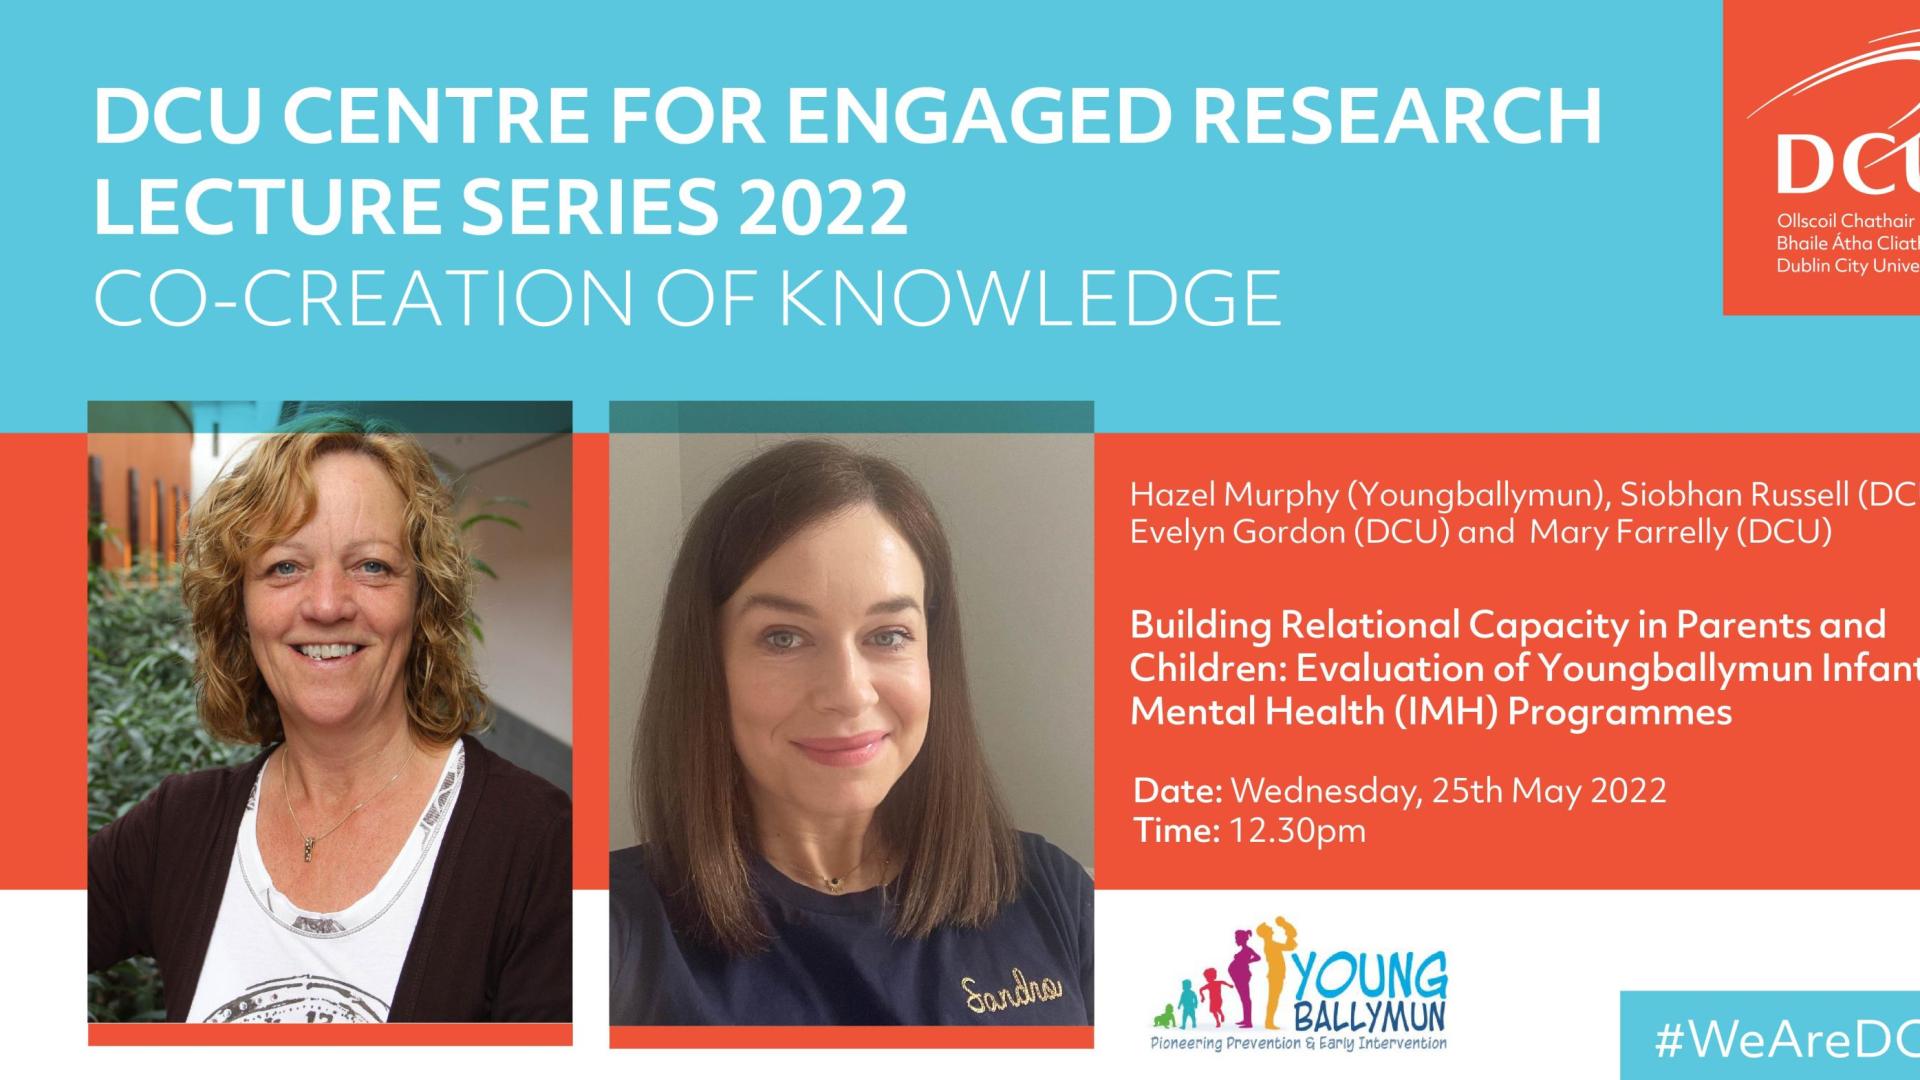 Graphic for the DCU CER event on Wednesday, 25th May